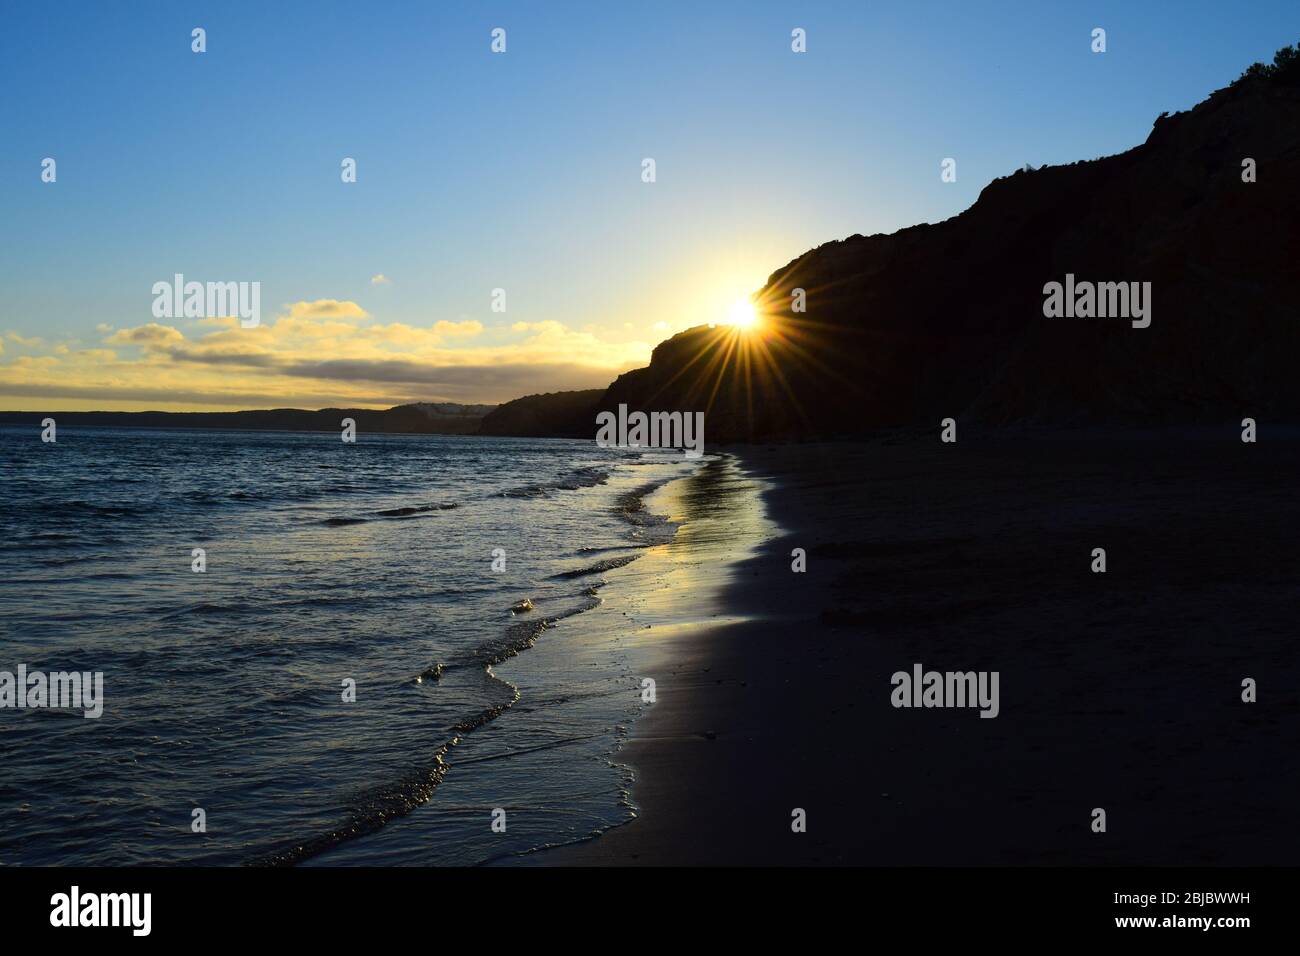 A Beach at Sunset in the Algarve Stock Photo